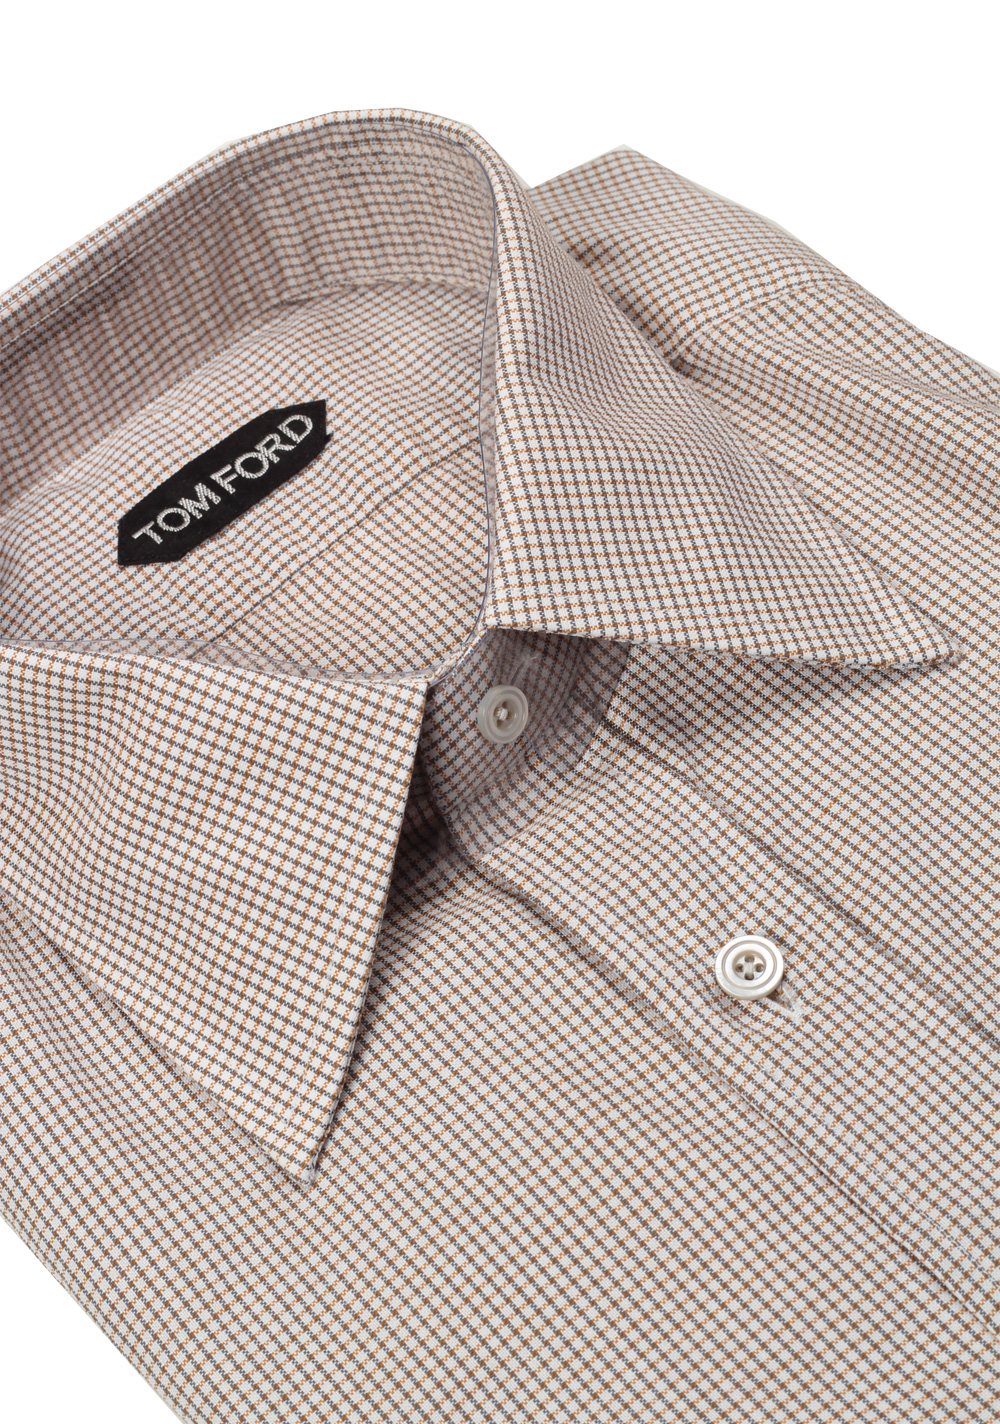 TOM FORD Checked White Brown Dress Shirt Size 40 / 15,75 U.S. | Costume Limité